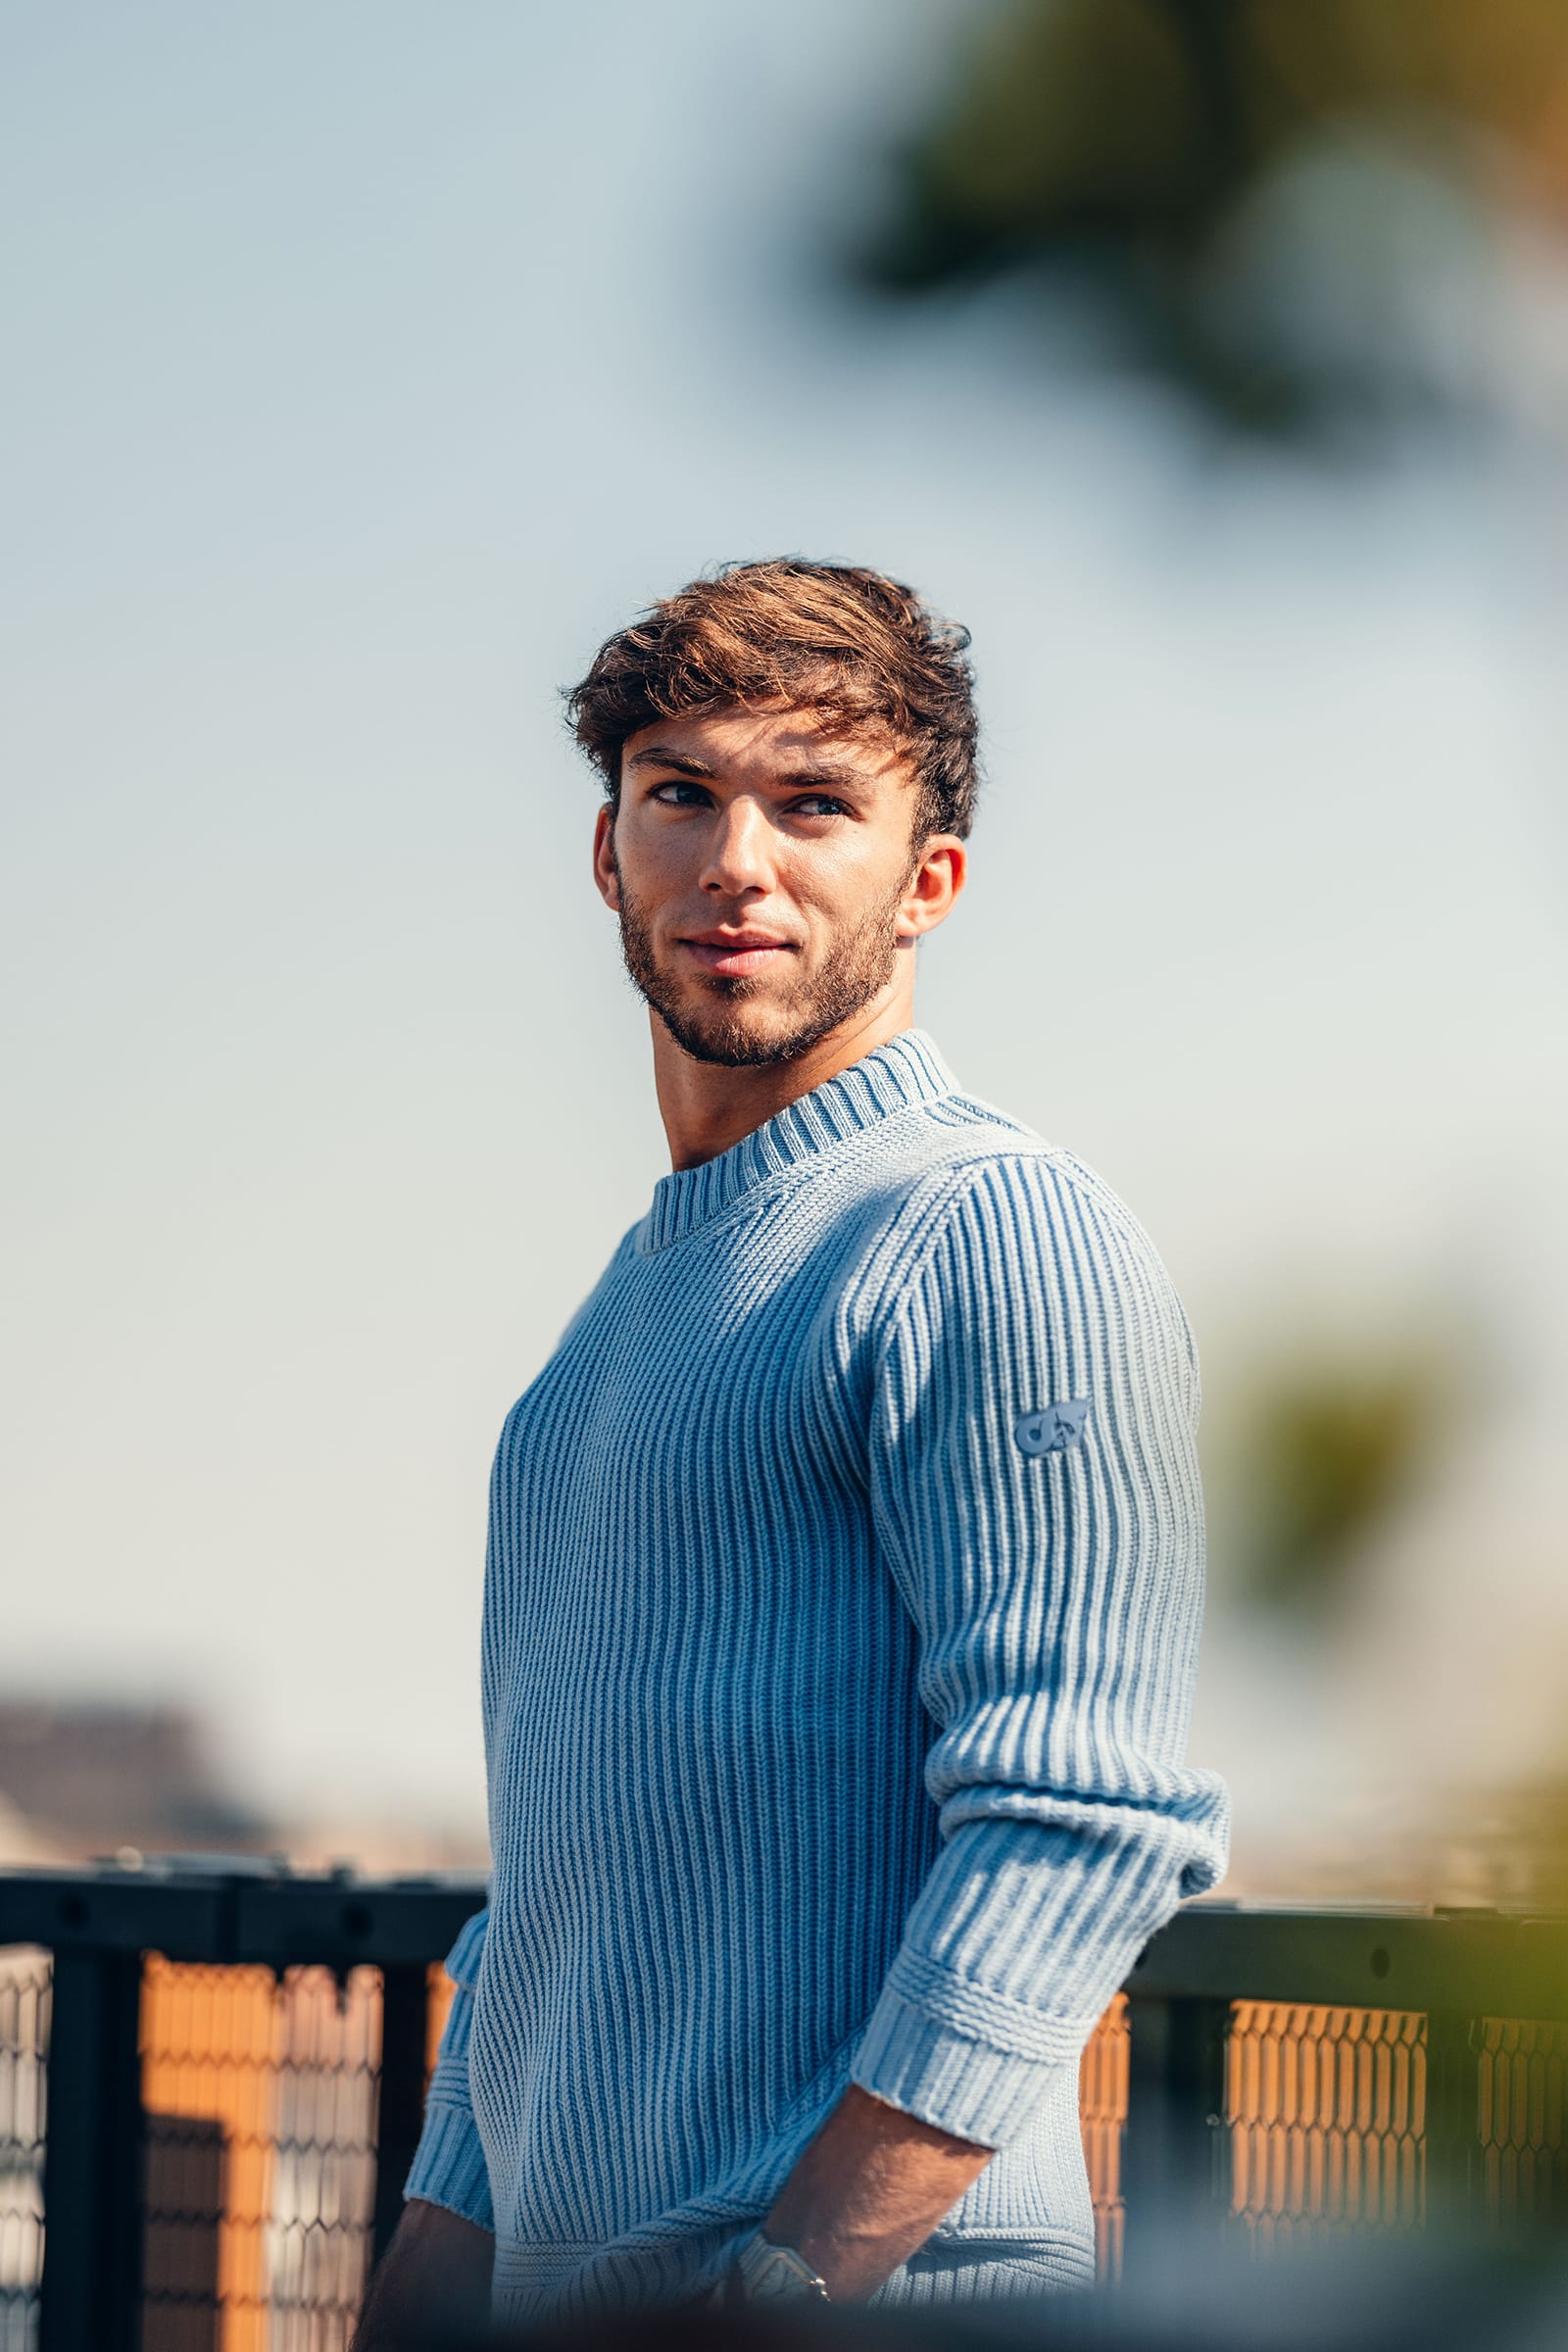 The Pierre Gasly Knit Capsule